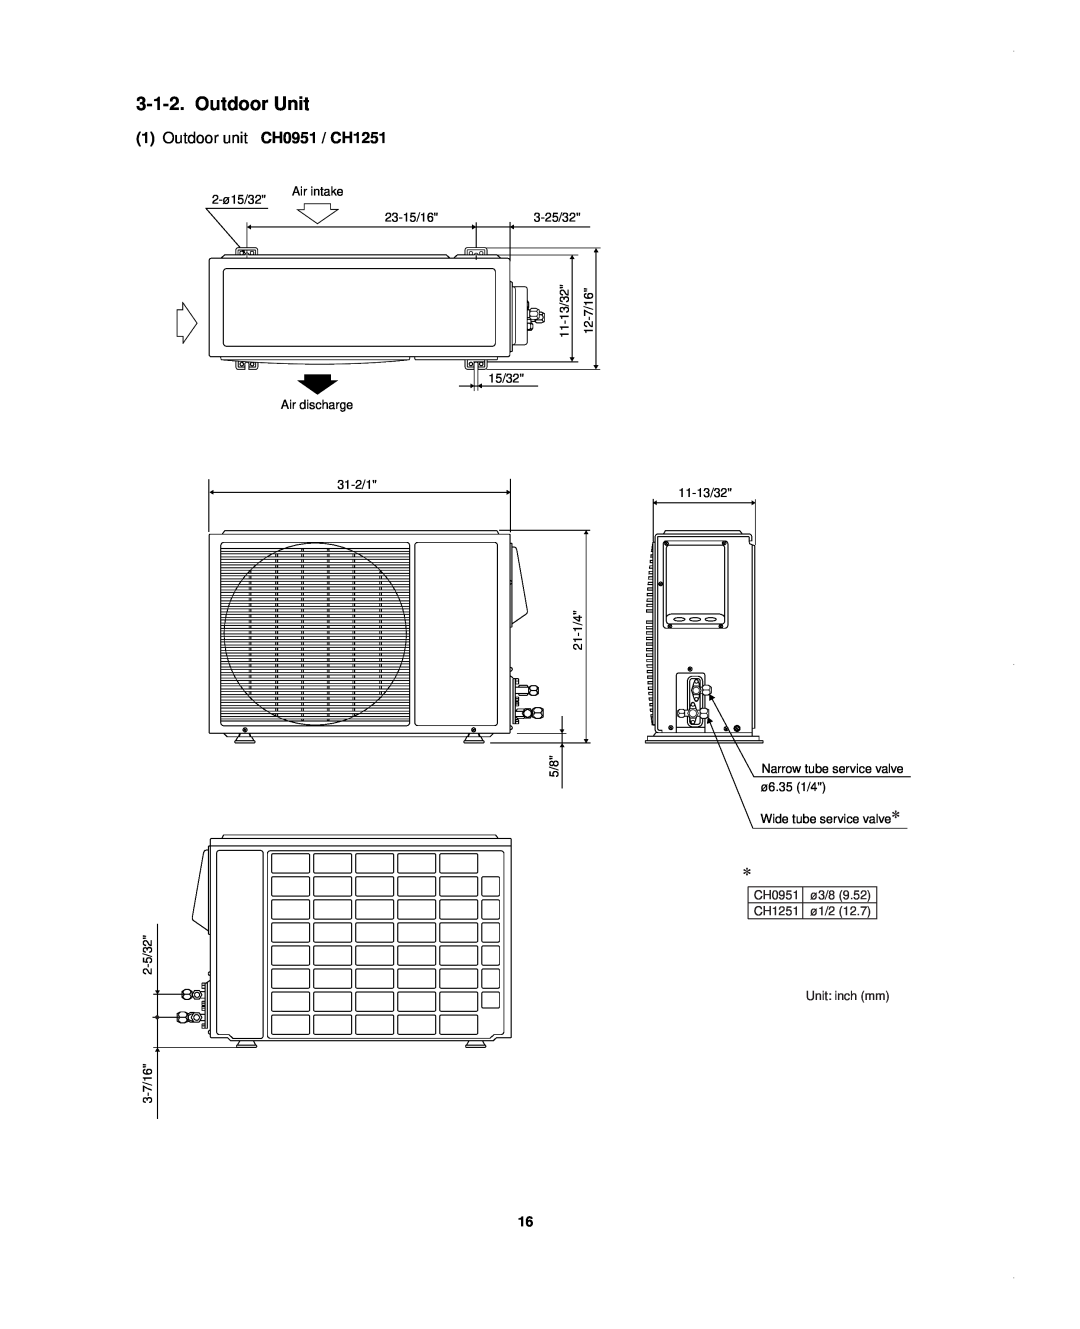 Sanyo KHS1852-S, CH1852, CH0952 service manual Outdoor Unit, Outdoor unit CH0951 / CH1251 